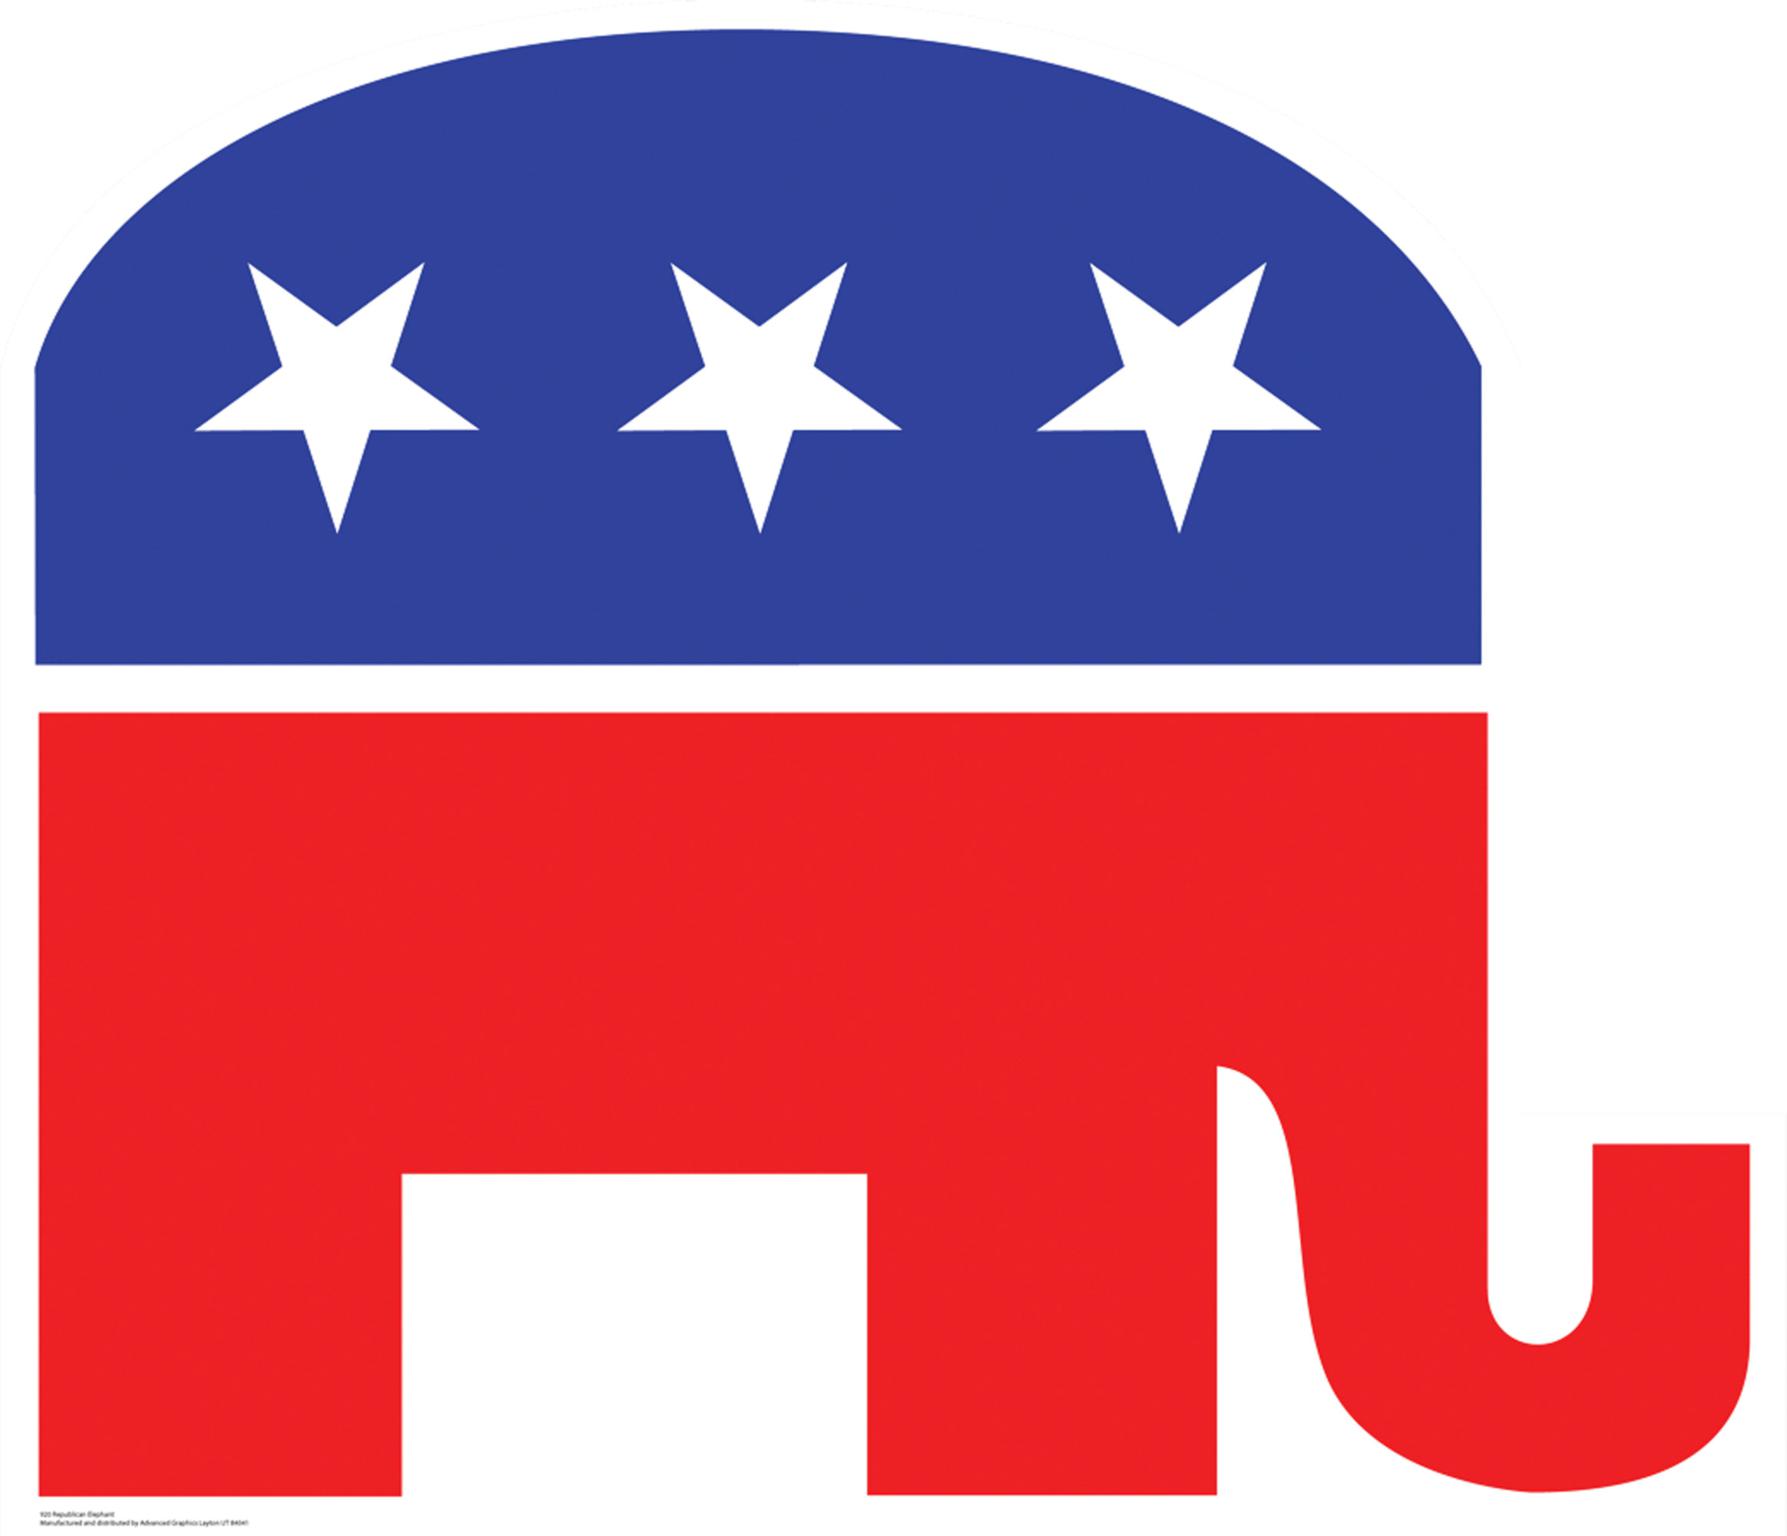 Pictures Of Republican Elephant - Clipart library